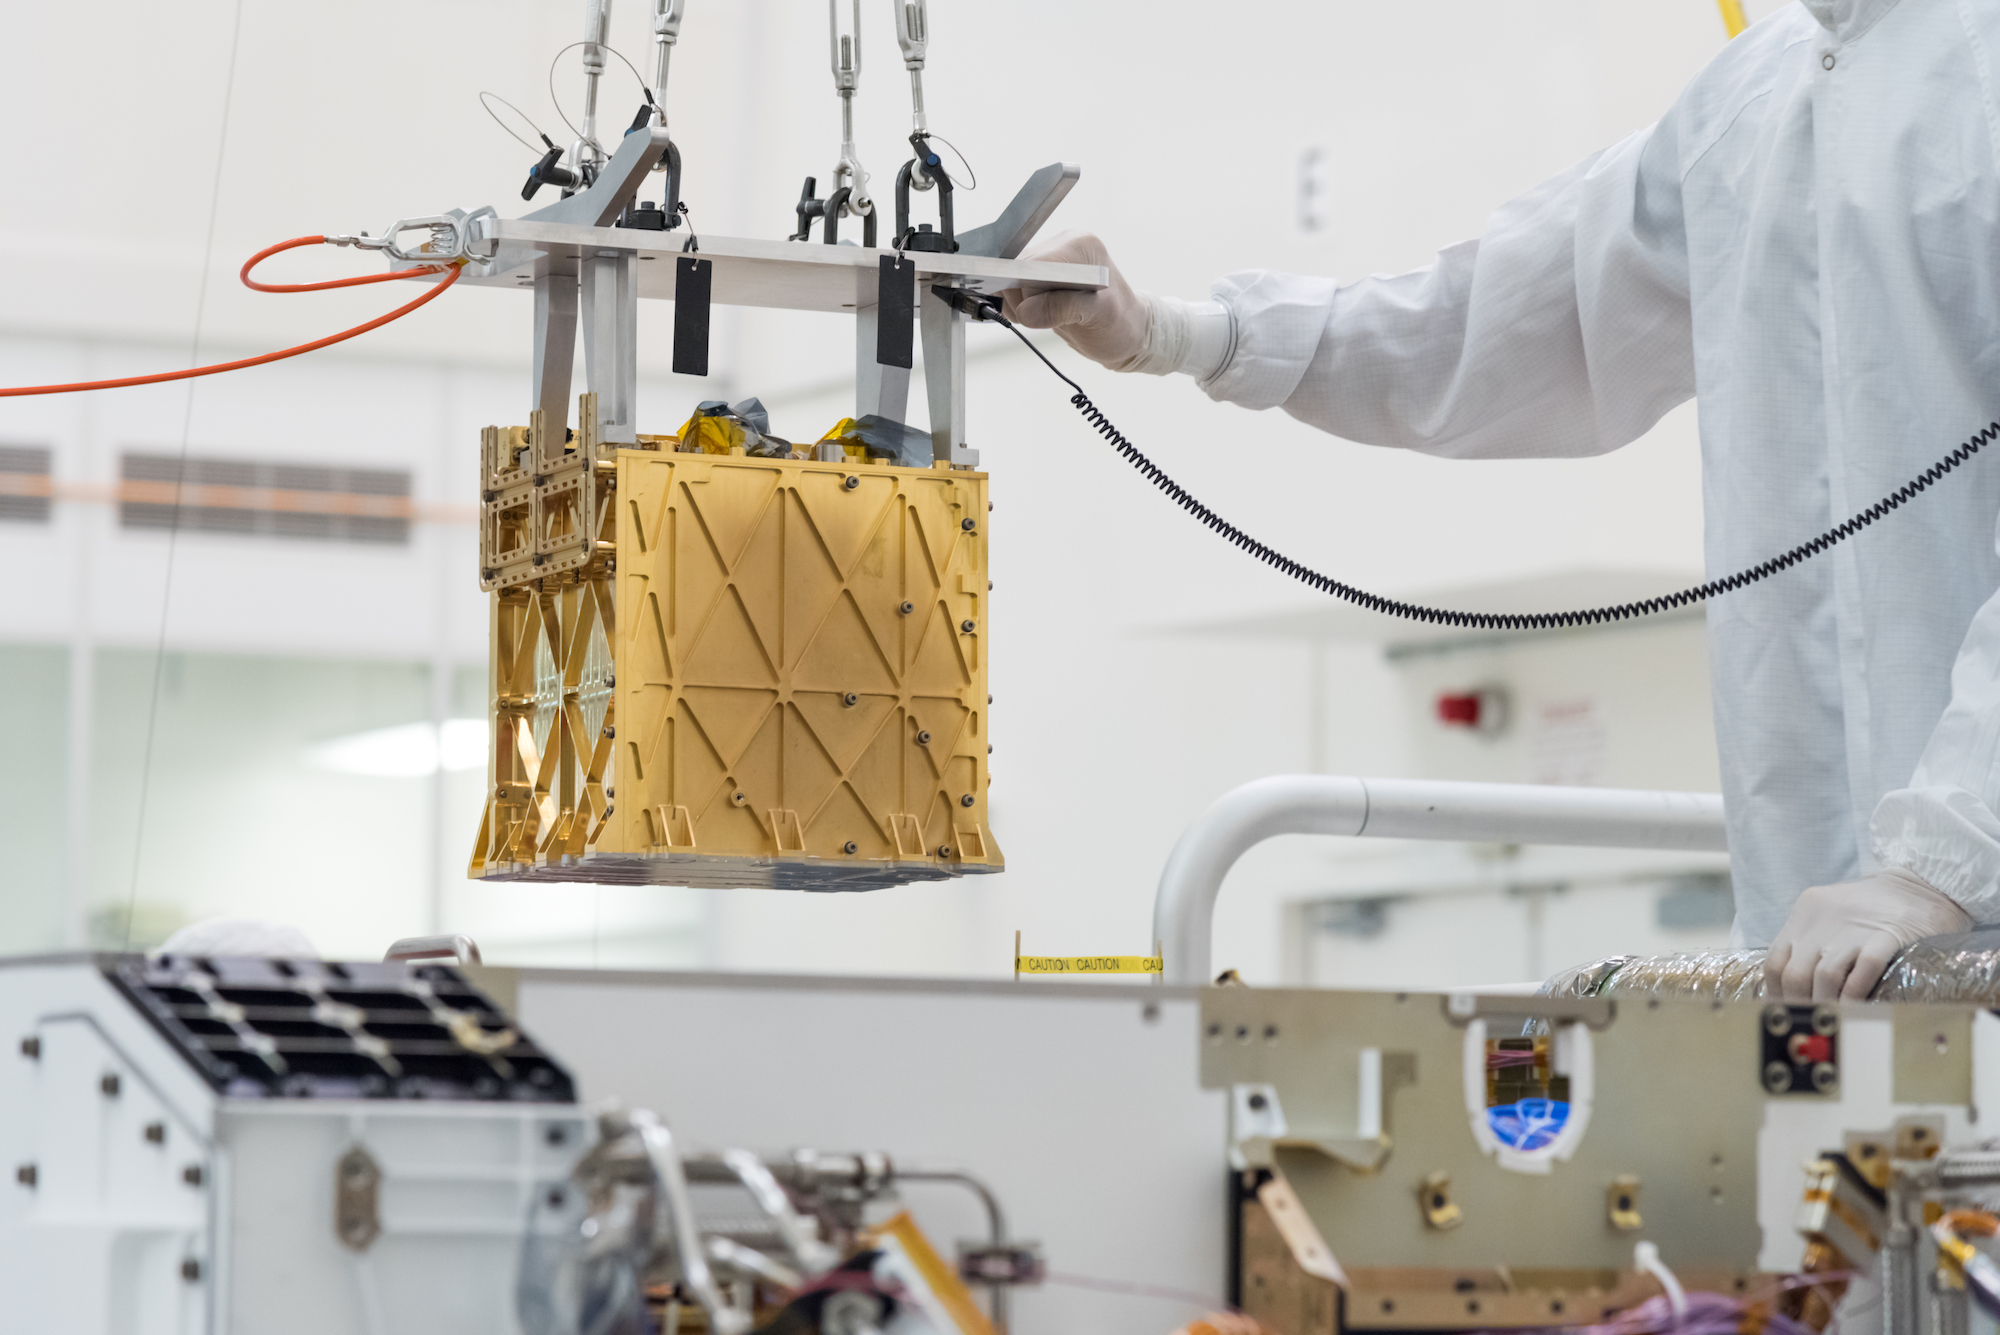 Image of the MOXIE device, which will isolate oxygen from Mars's atmosphere.